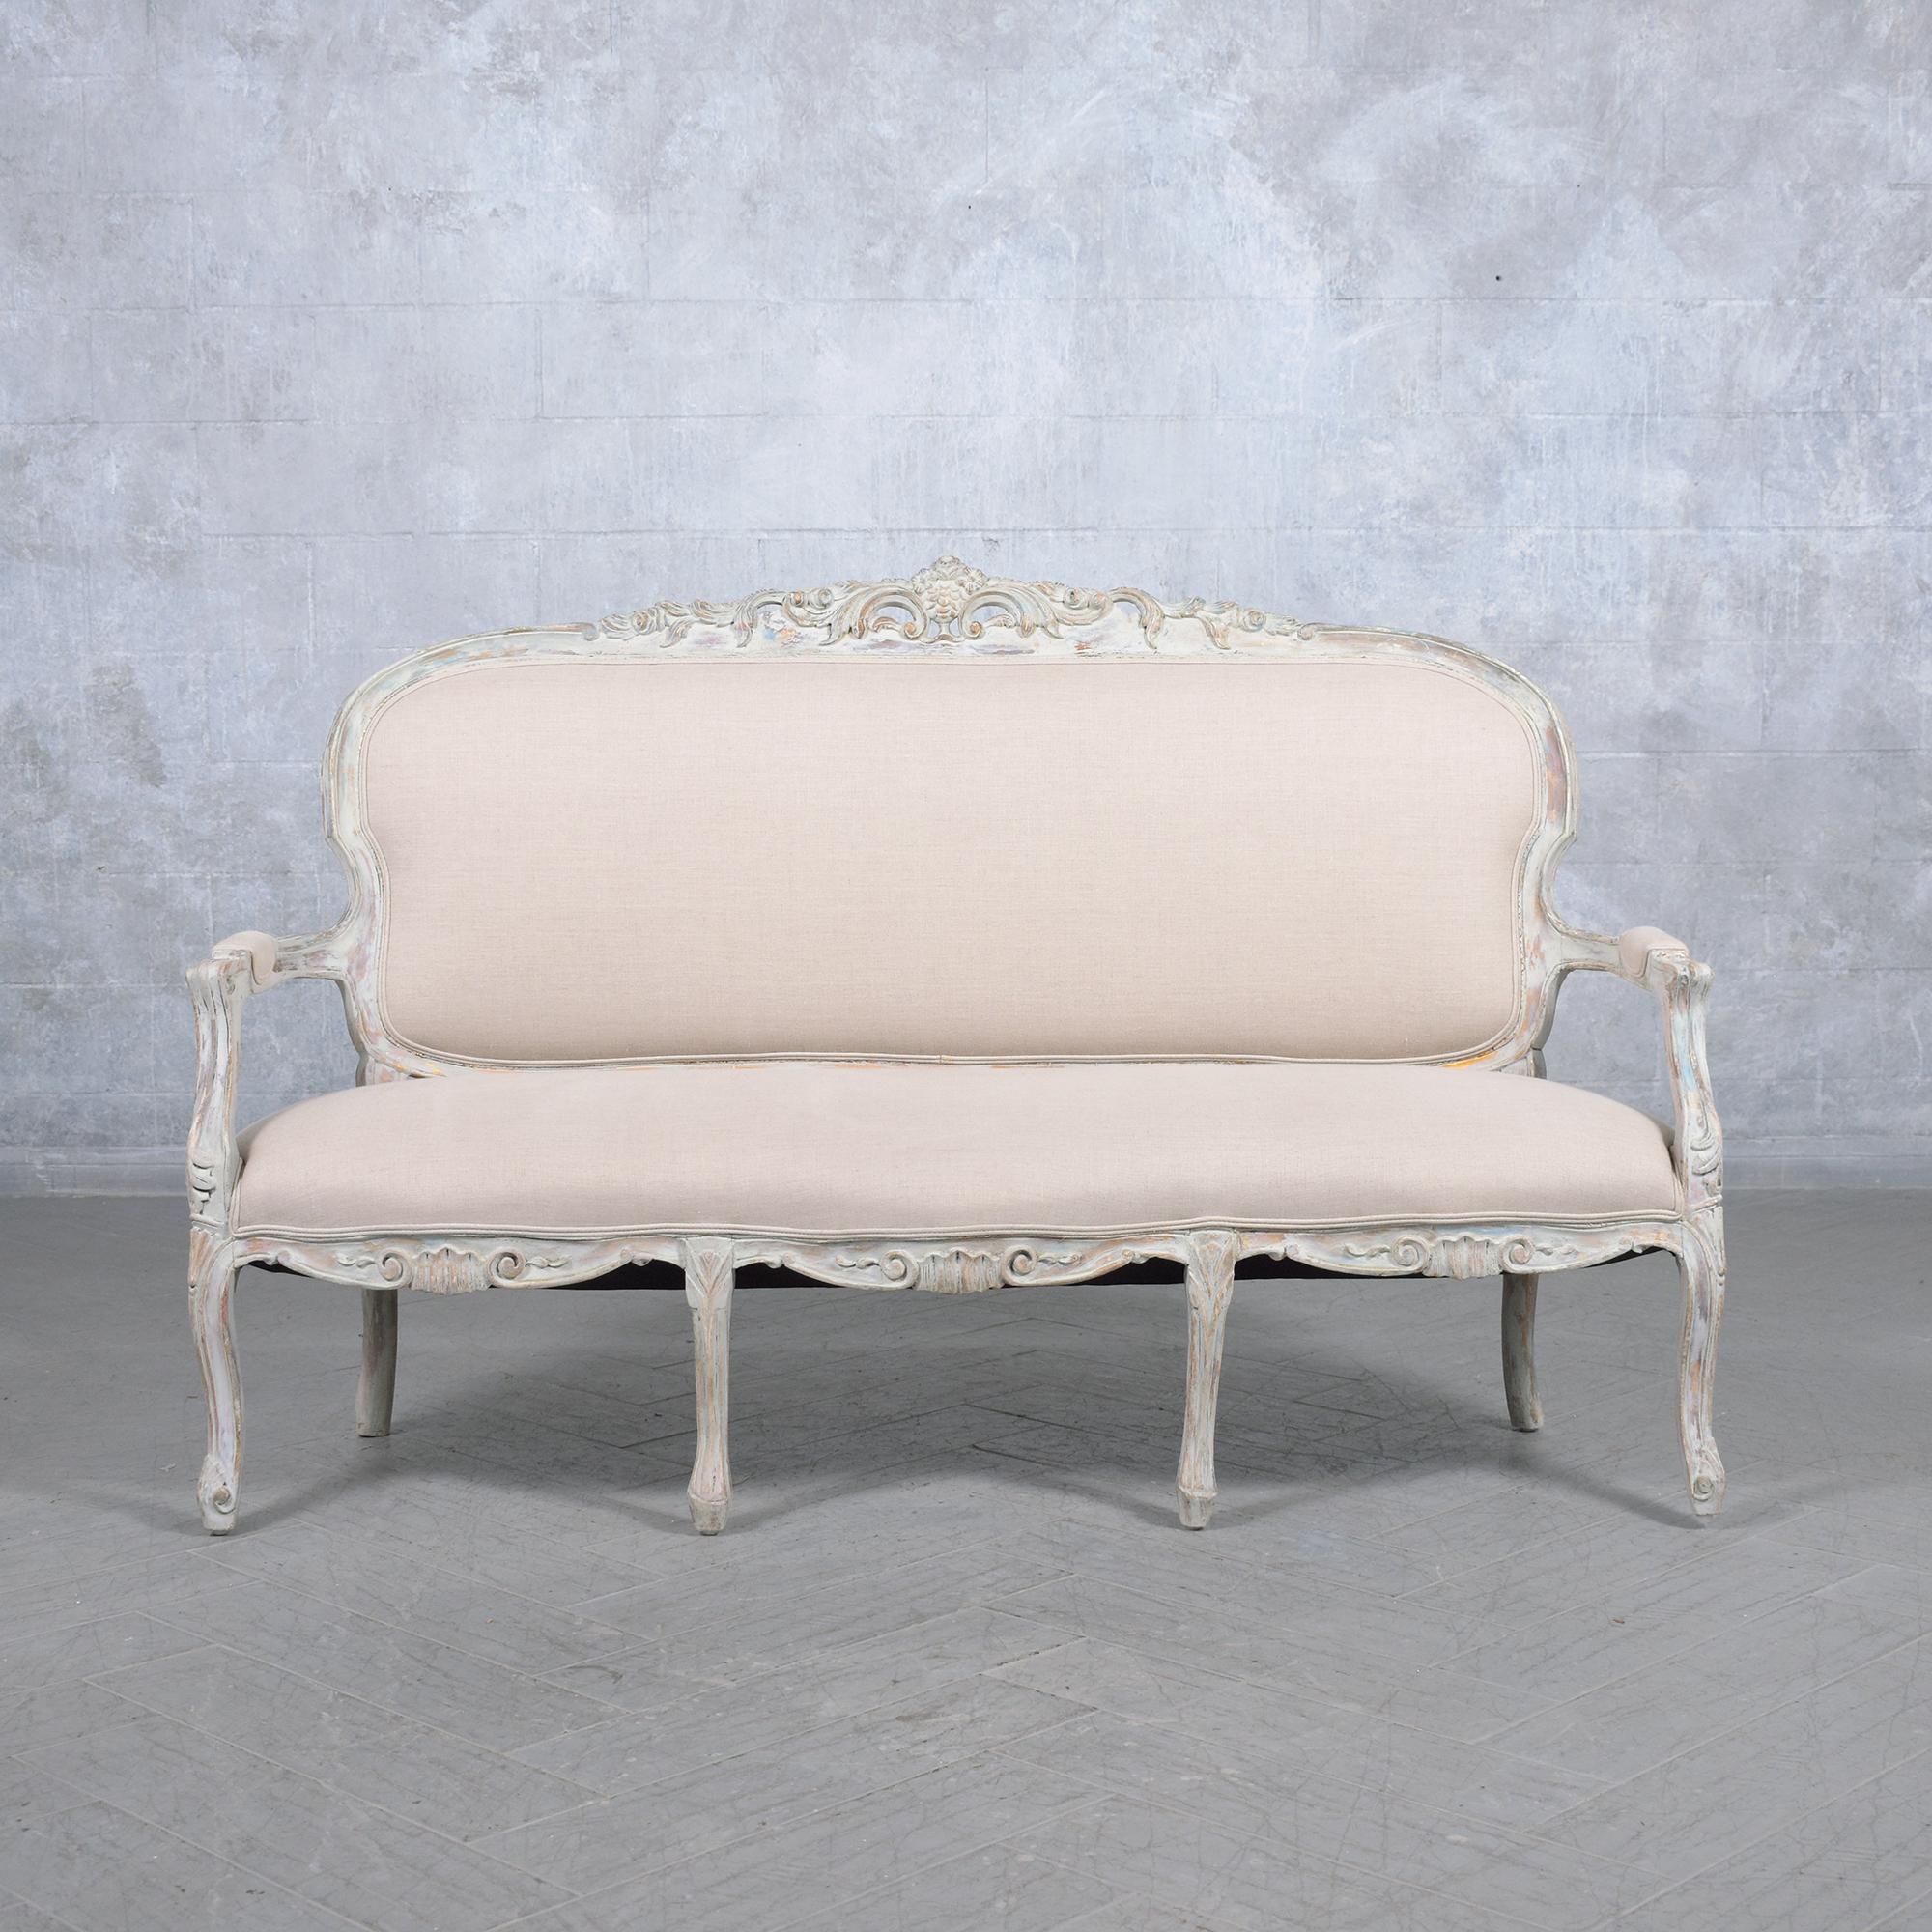 Step back in time with our early 1900s French sofa, a masterpiece of craftsmanship and classic beauty. Skilfully restored by our expert team, this vintage gem retains its original splendor and elegance. Crafted from solid wood, it features intricate